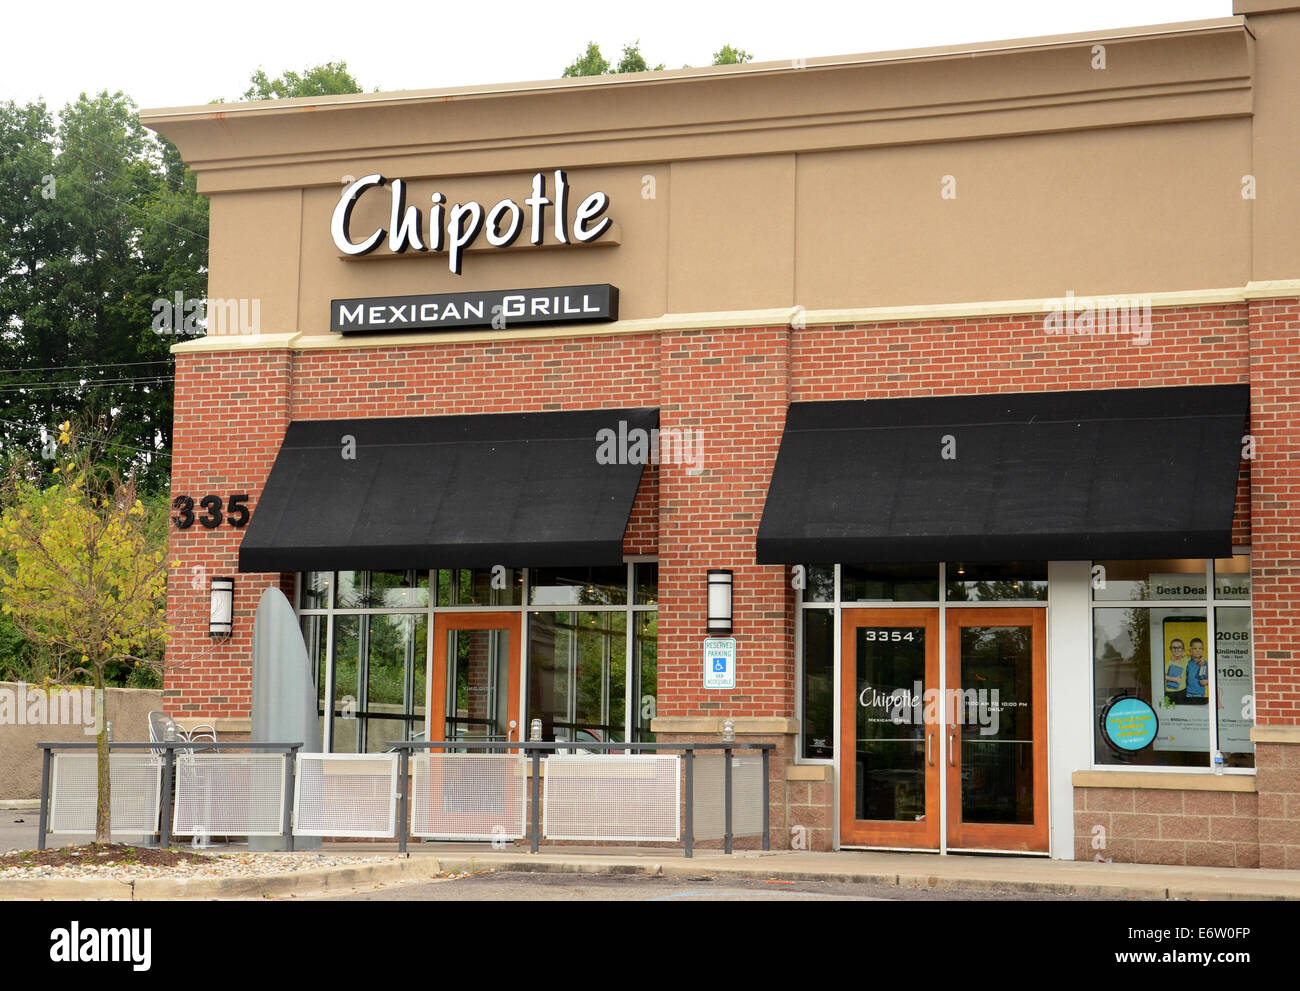 ANN ARBOR, MI - AUGUST 24: Chipotle Mexican Grill in Ann Arbor on August 24, 2014. Chipotle has 1680 stores in the United States Stock Photo